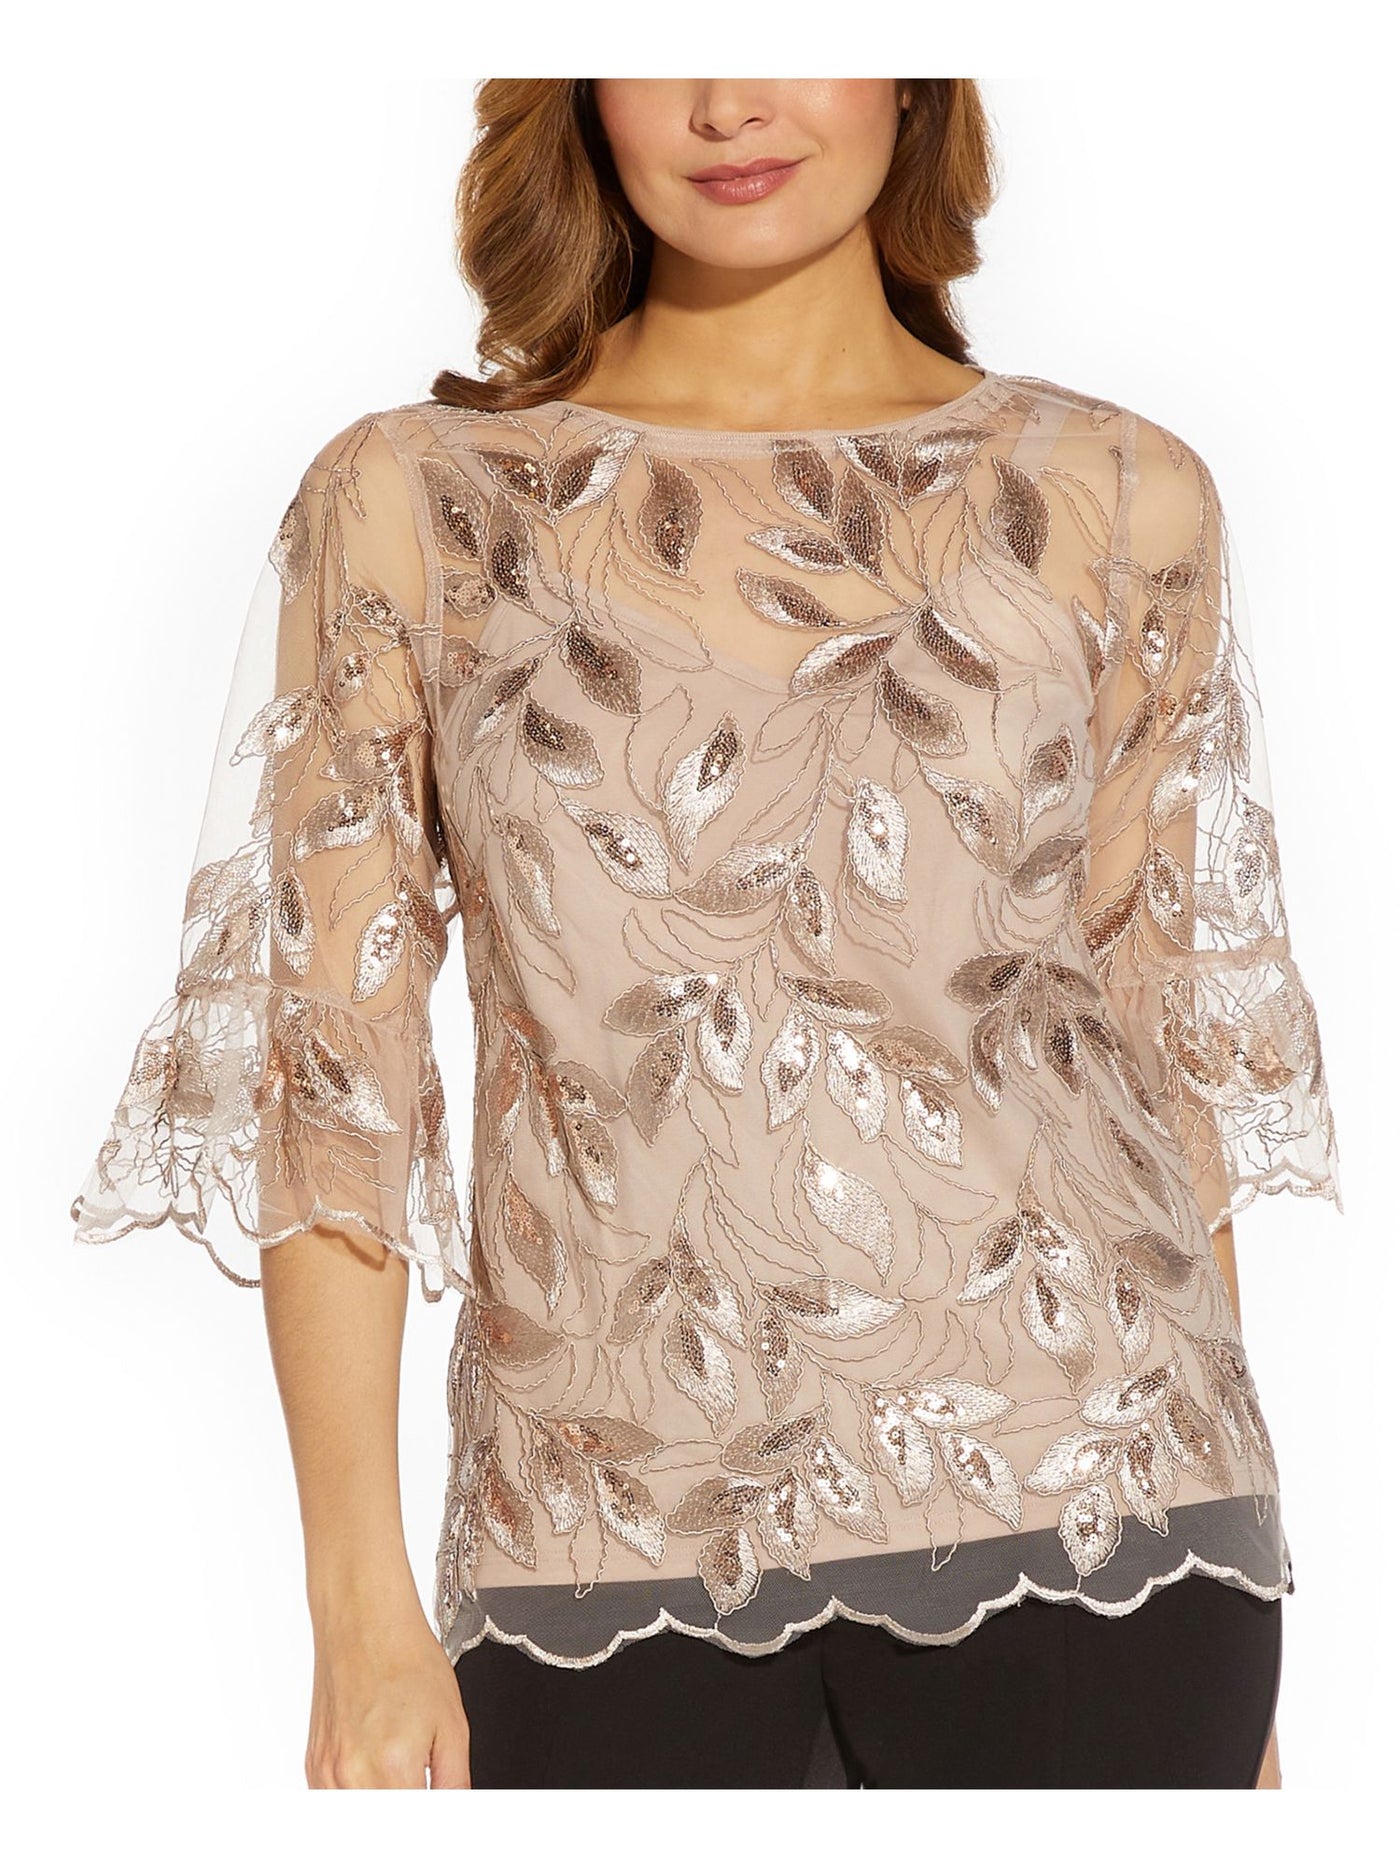 ADRIANNA PAPELL Womens Beige Embellished Zippered Scalloped Lined Bell Sleeve Boat Neck Evening Top 8